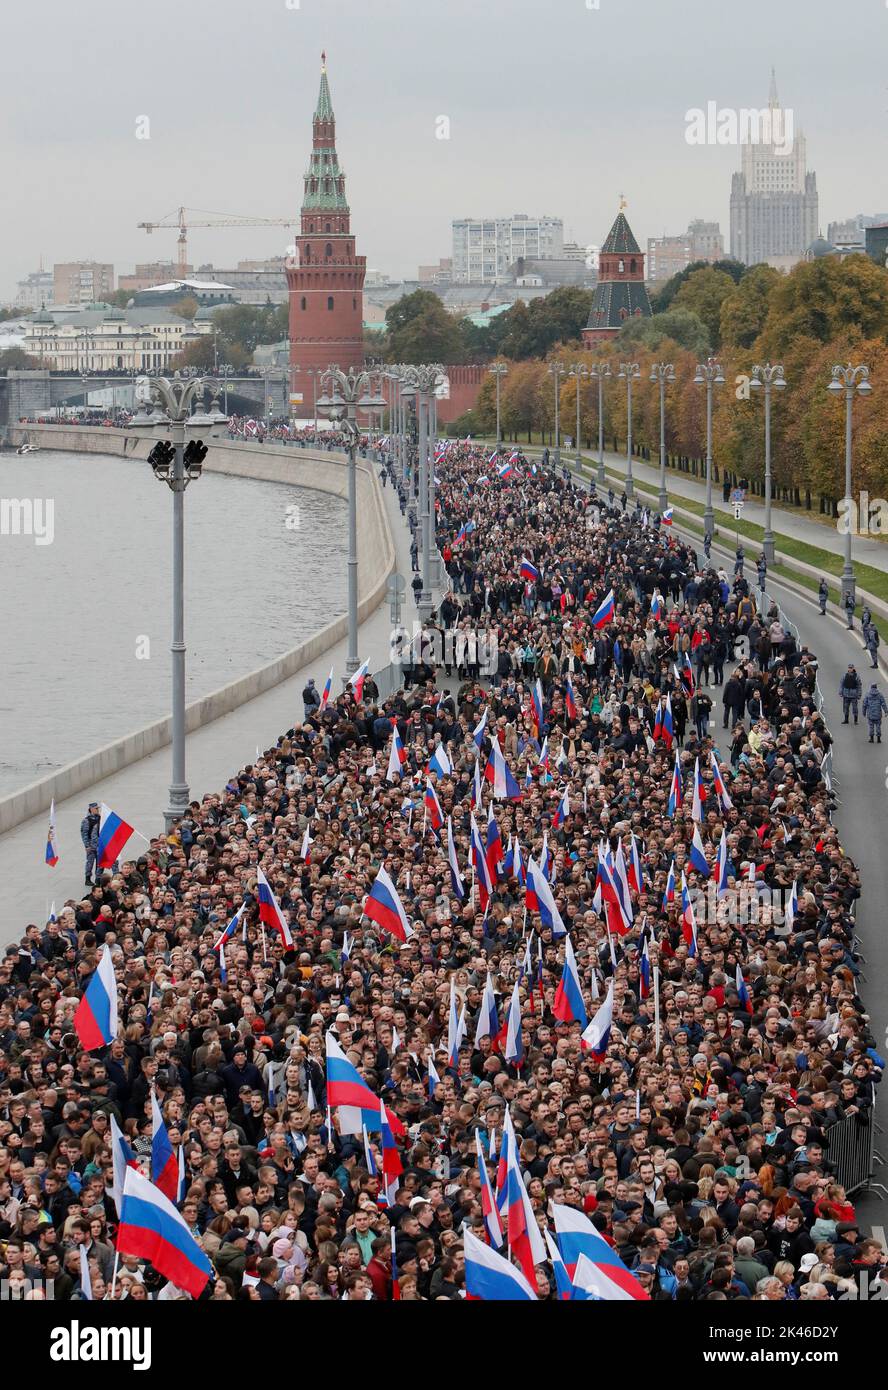 People attend a concert marking the declared annexation of the Russian-controlled territories of four Ukraine's Donetsk, Luhansk, Kherson and Zaporizhzhia regions, after holding what Russian authorities called referendums in the occupied areas of Ukraine that were condemned by Kyiv and governments worldwide, on an embankment near the Kremlin in central Moscow, Russia, September 30, 2022. REUTERS/REUTERS PHOTOGRAPHER Stock Photo